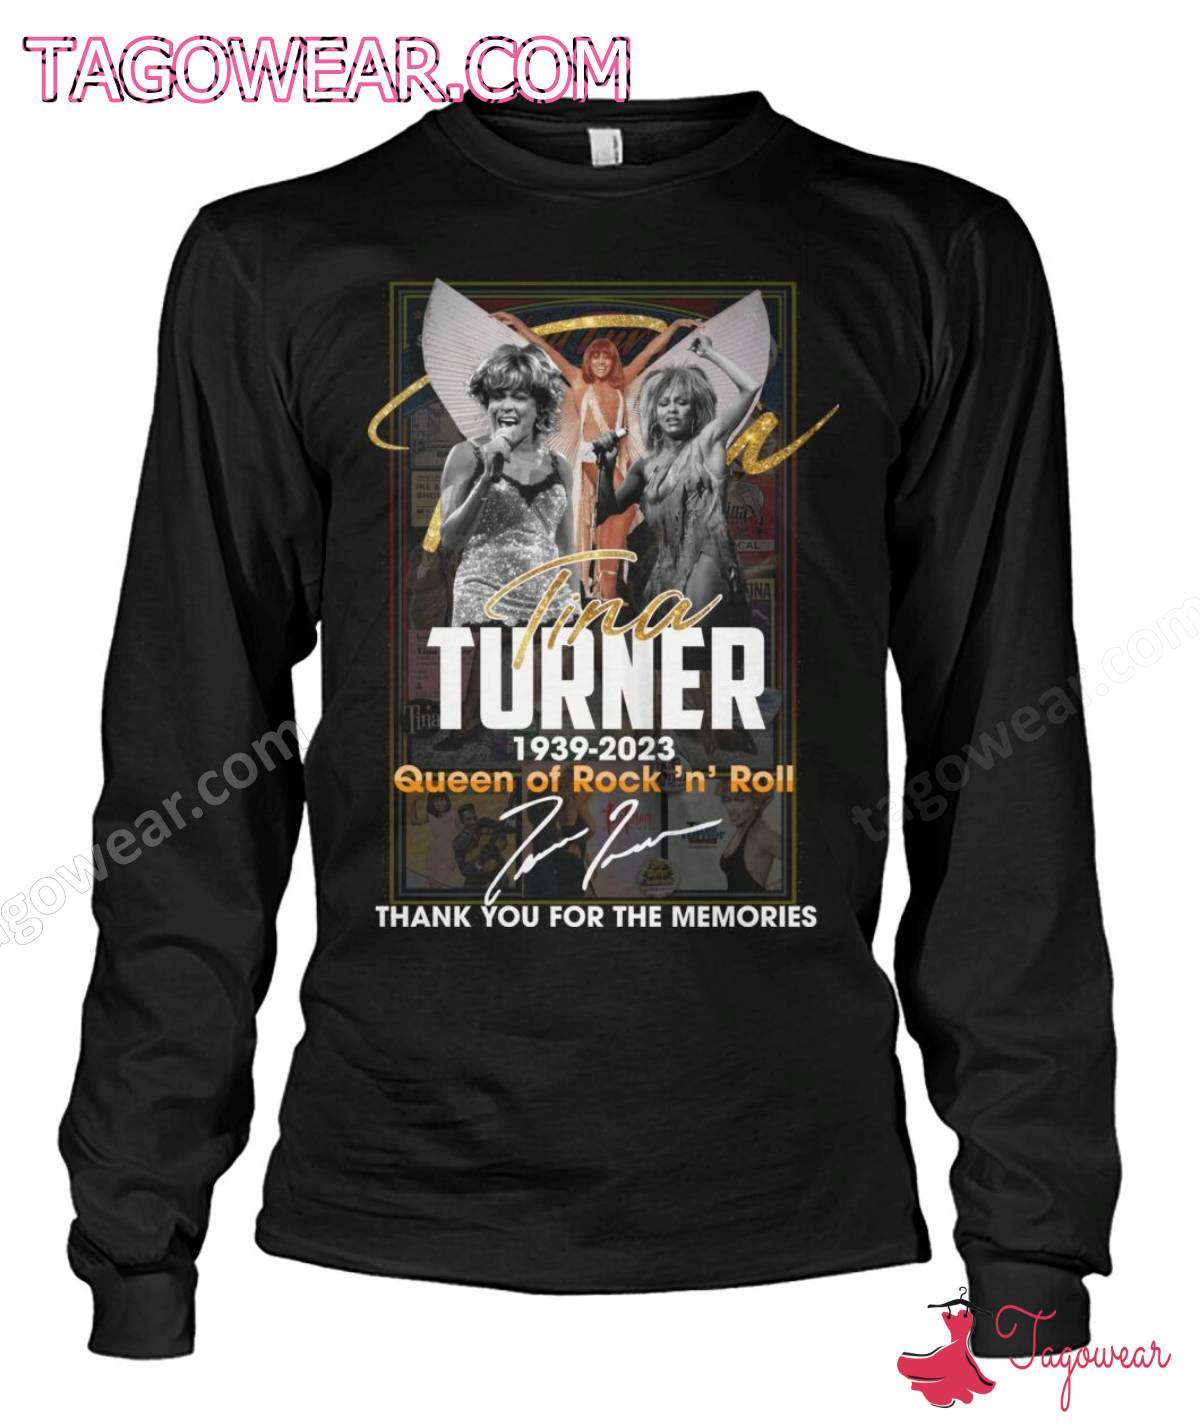 Tina Turner 1939-2023 Queen Of Rock 'n' Roll Signature Thank You For The Memories Shirt a